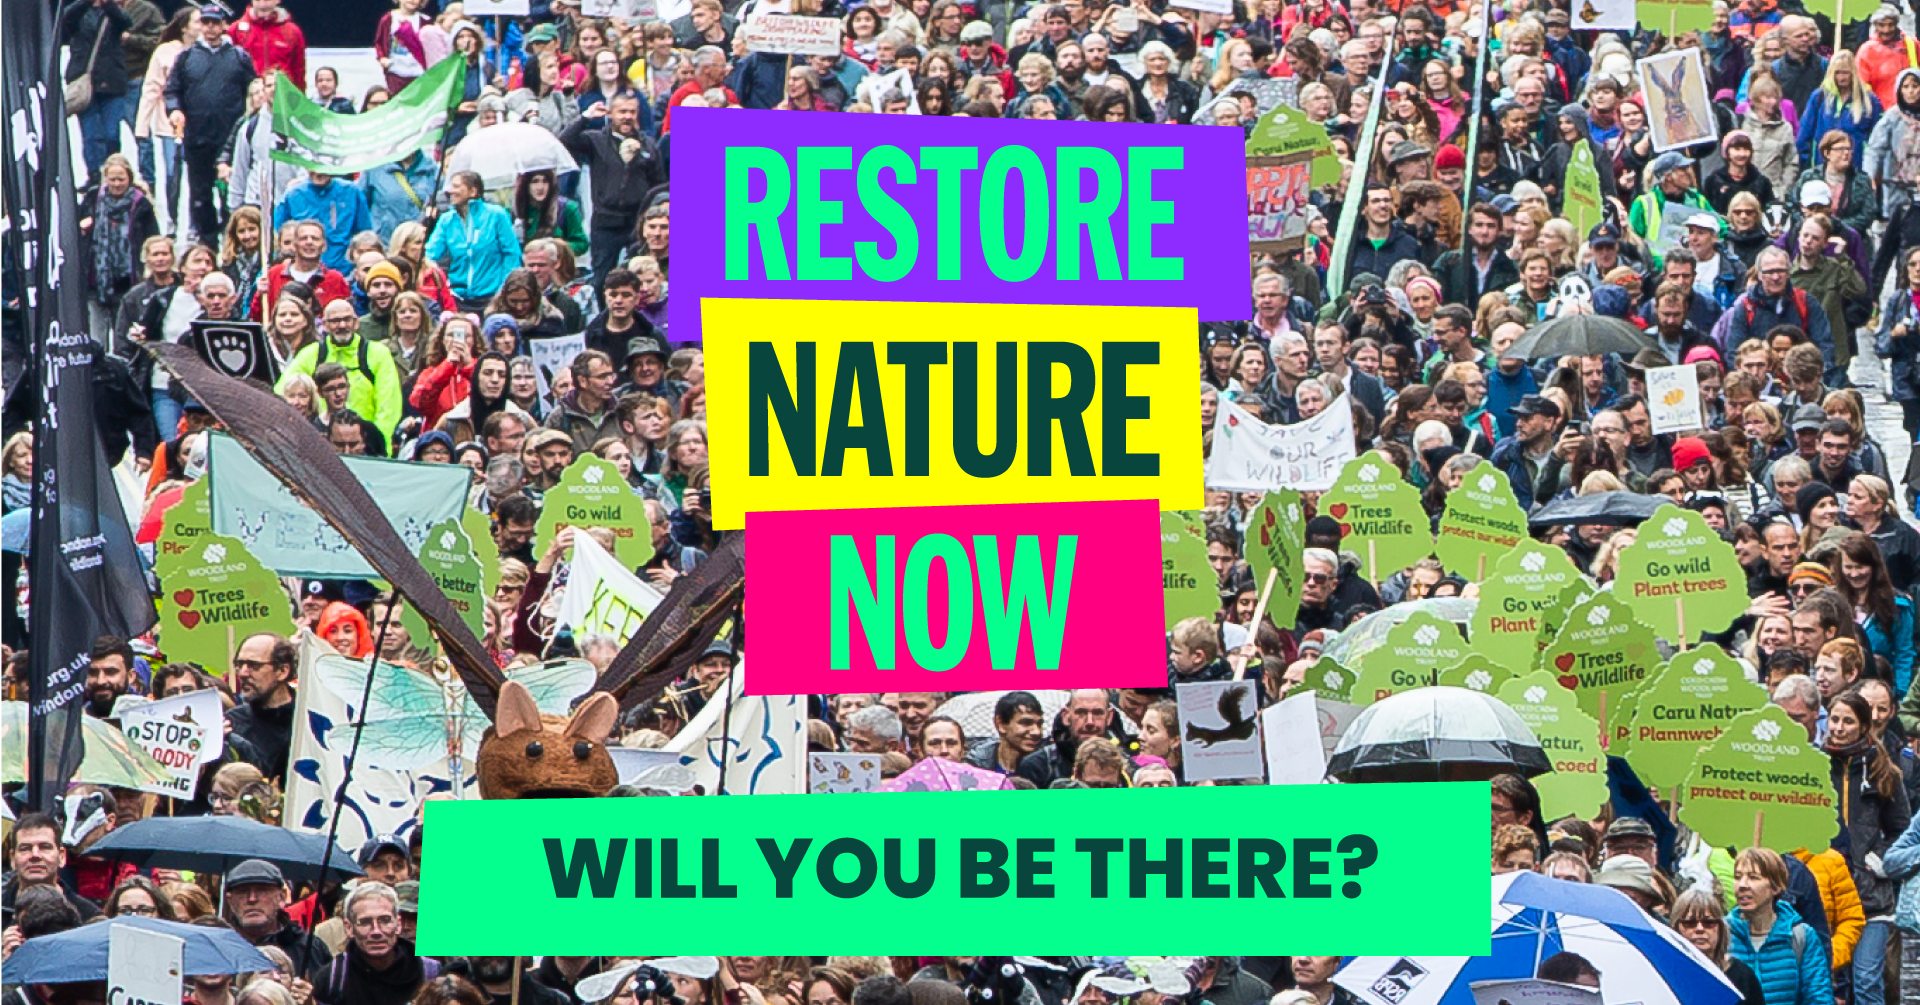 An image of people marching with the Rstore Nature Now logo